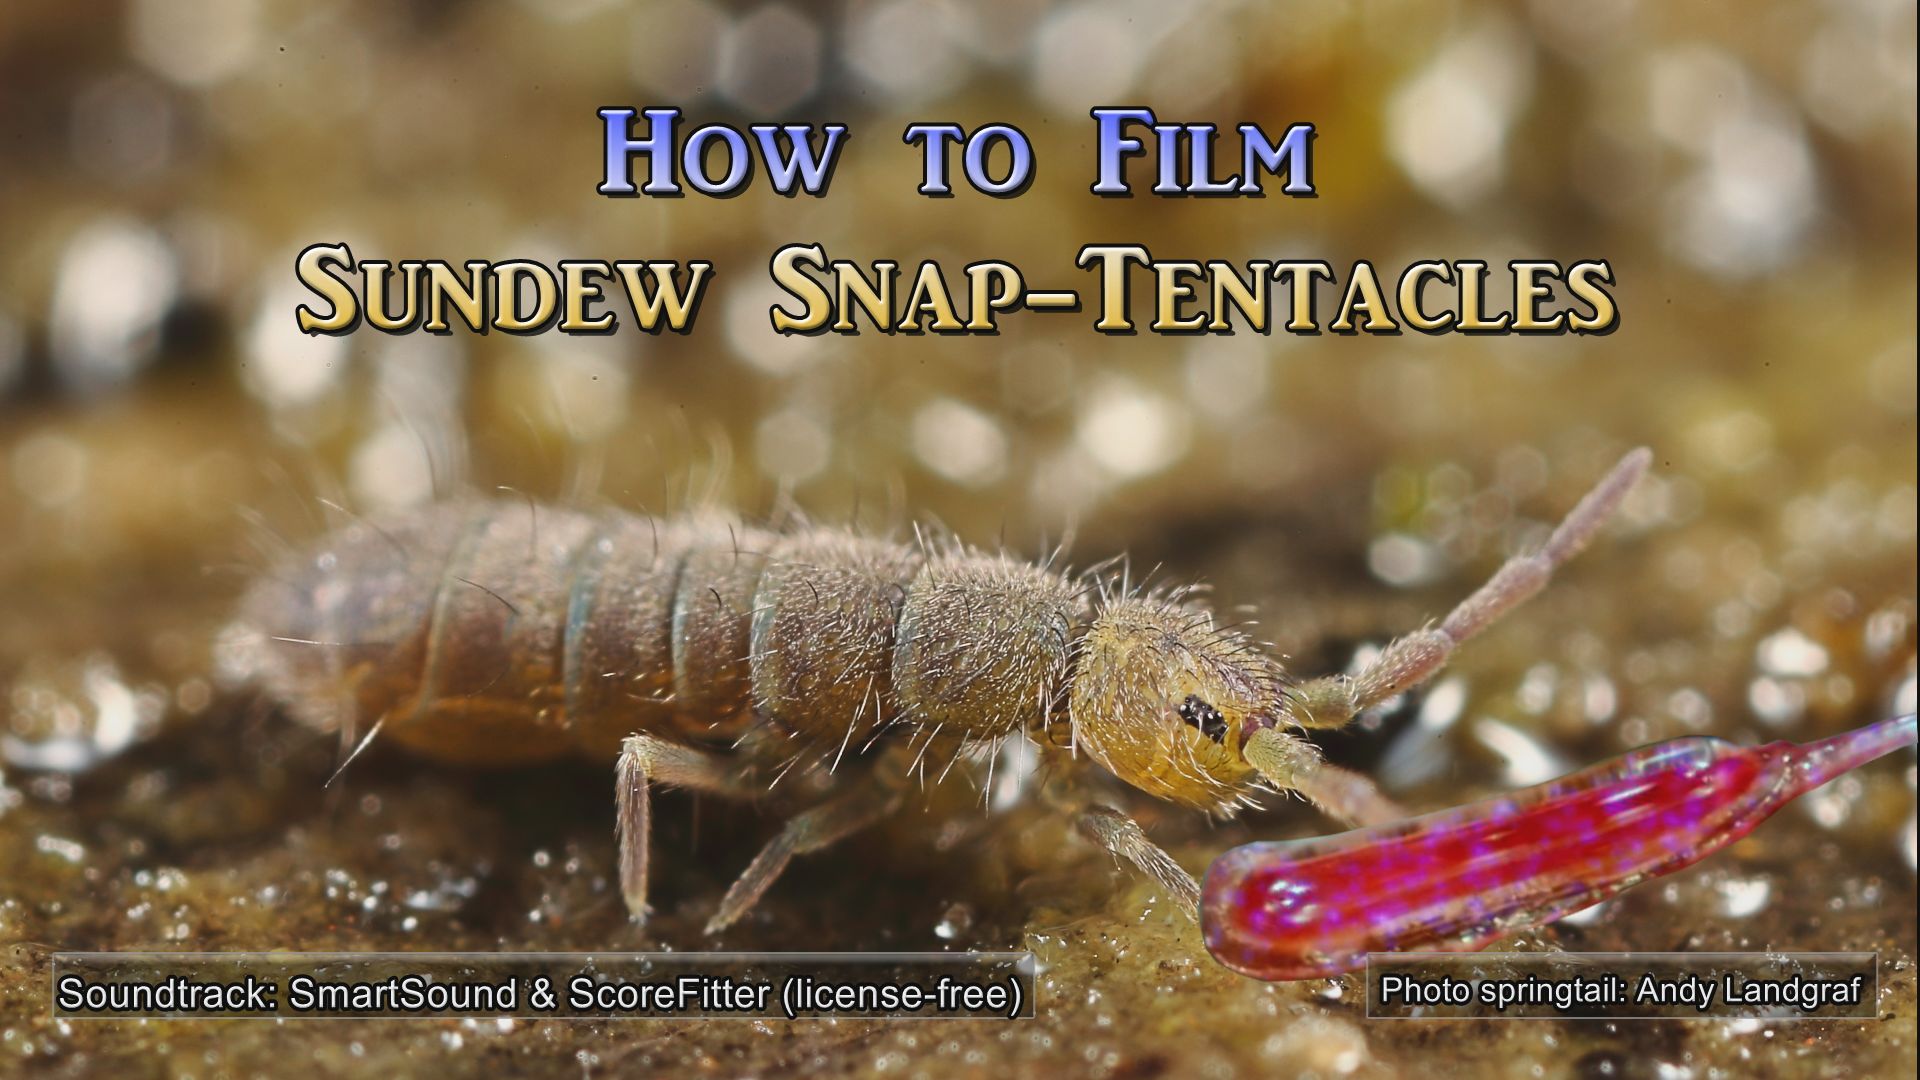 How to film sundew snap-tentacles